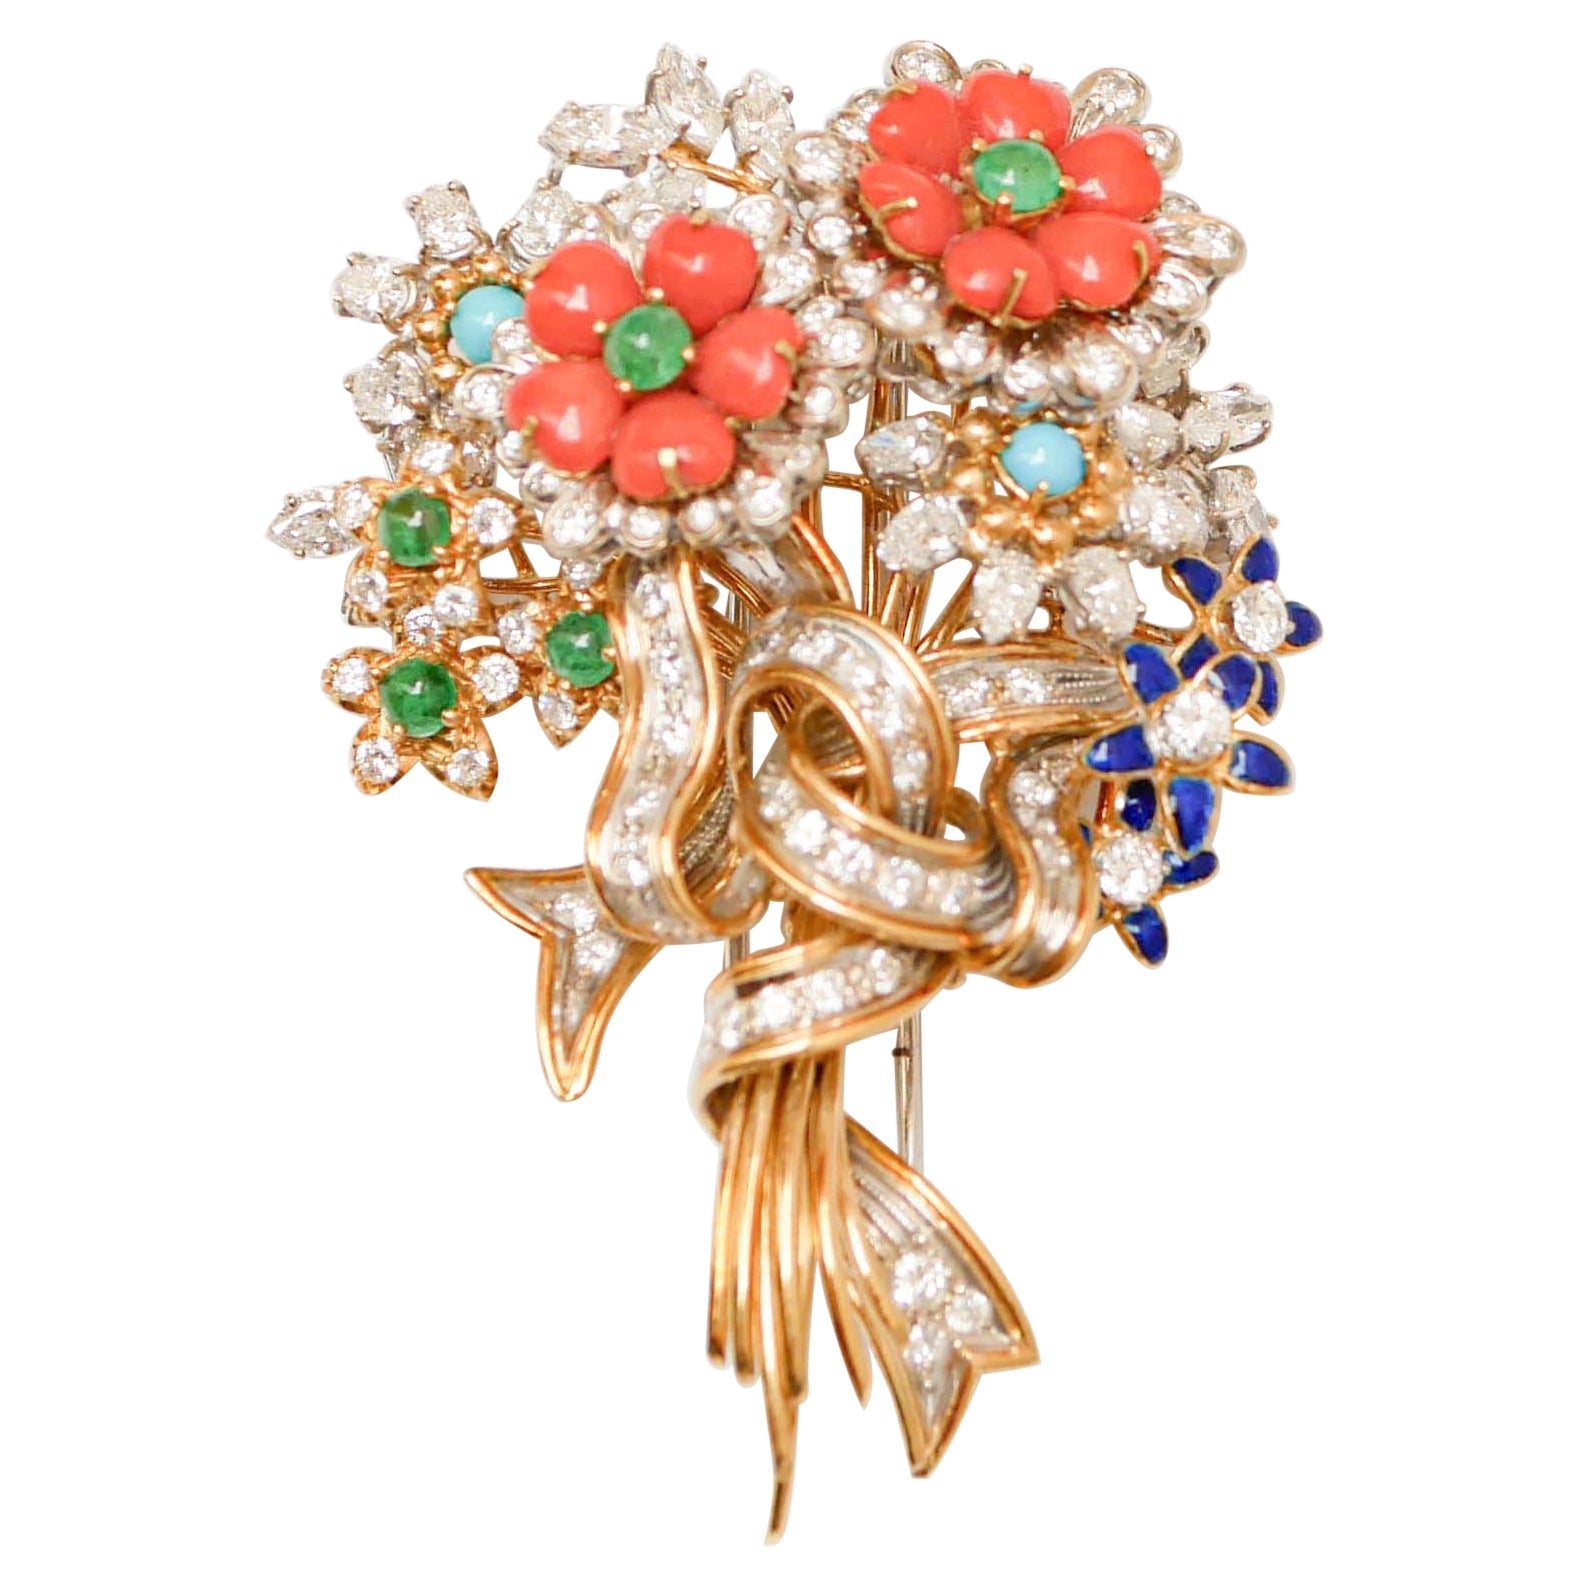 Coral, Emeralds, Diamonds, Turquoise, Enamel, 18Kt  Gold and Platinum Brooch. For Sale